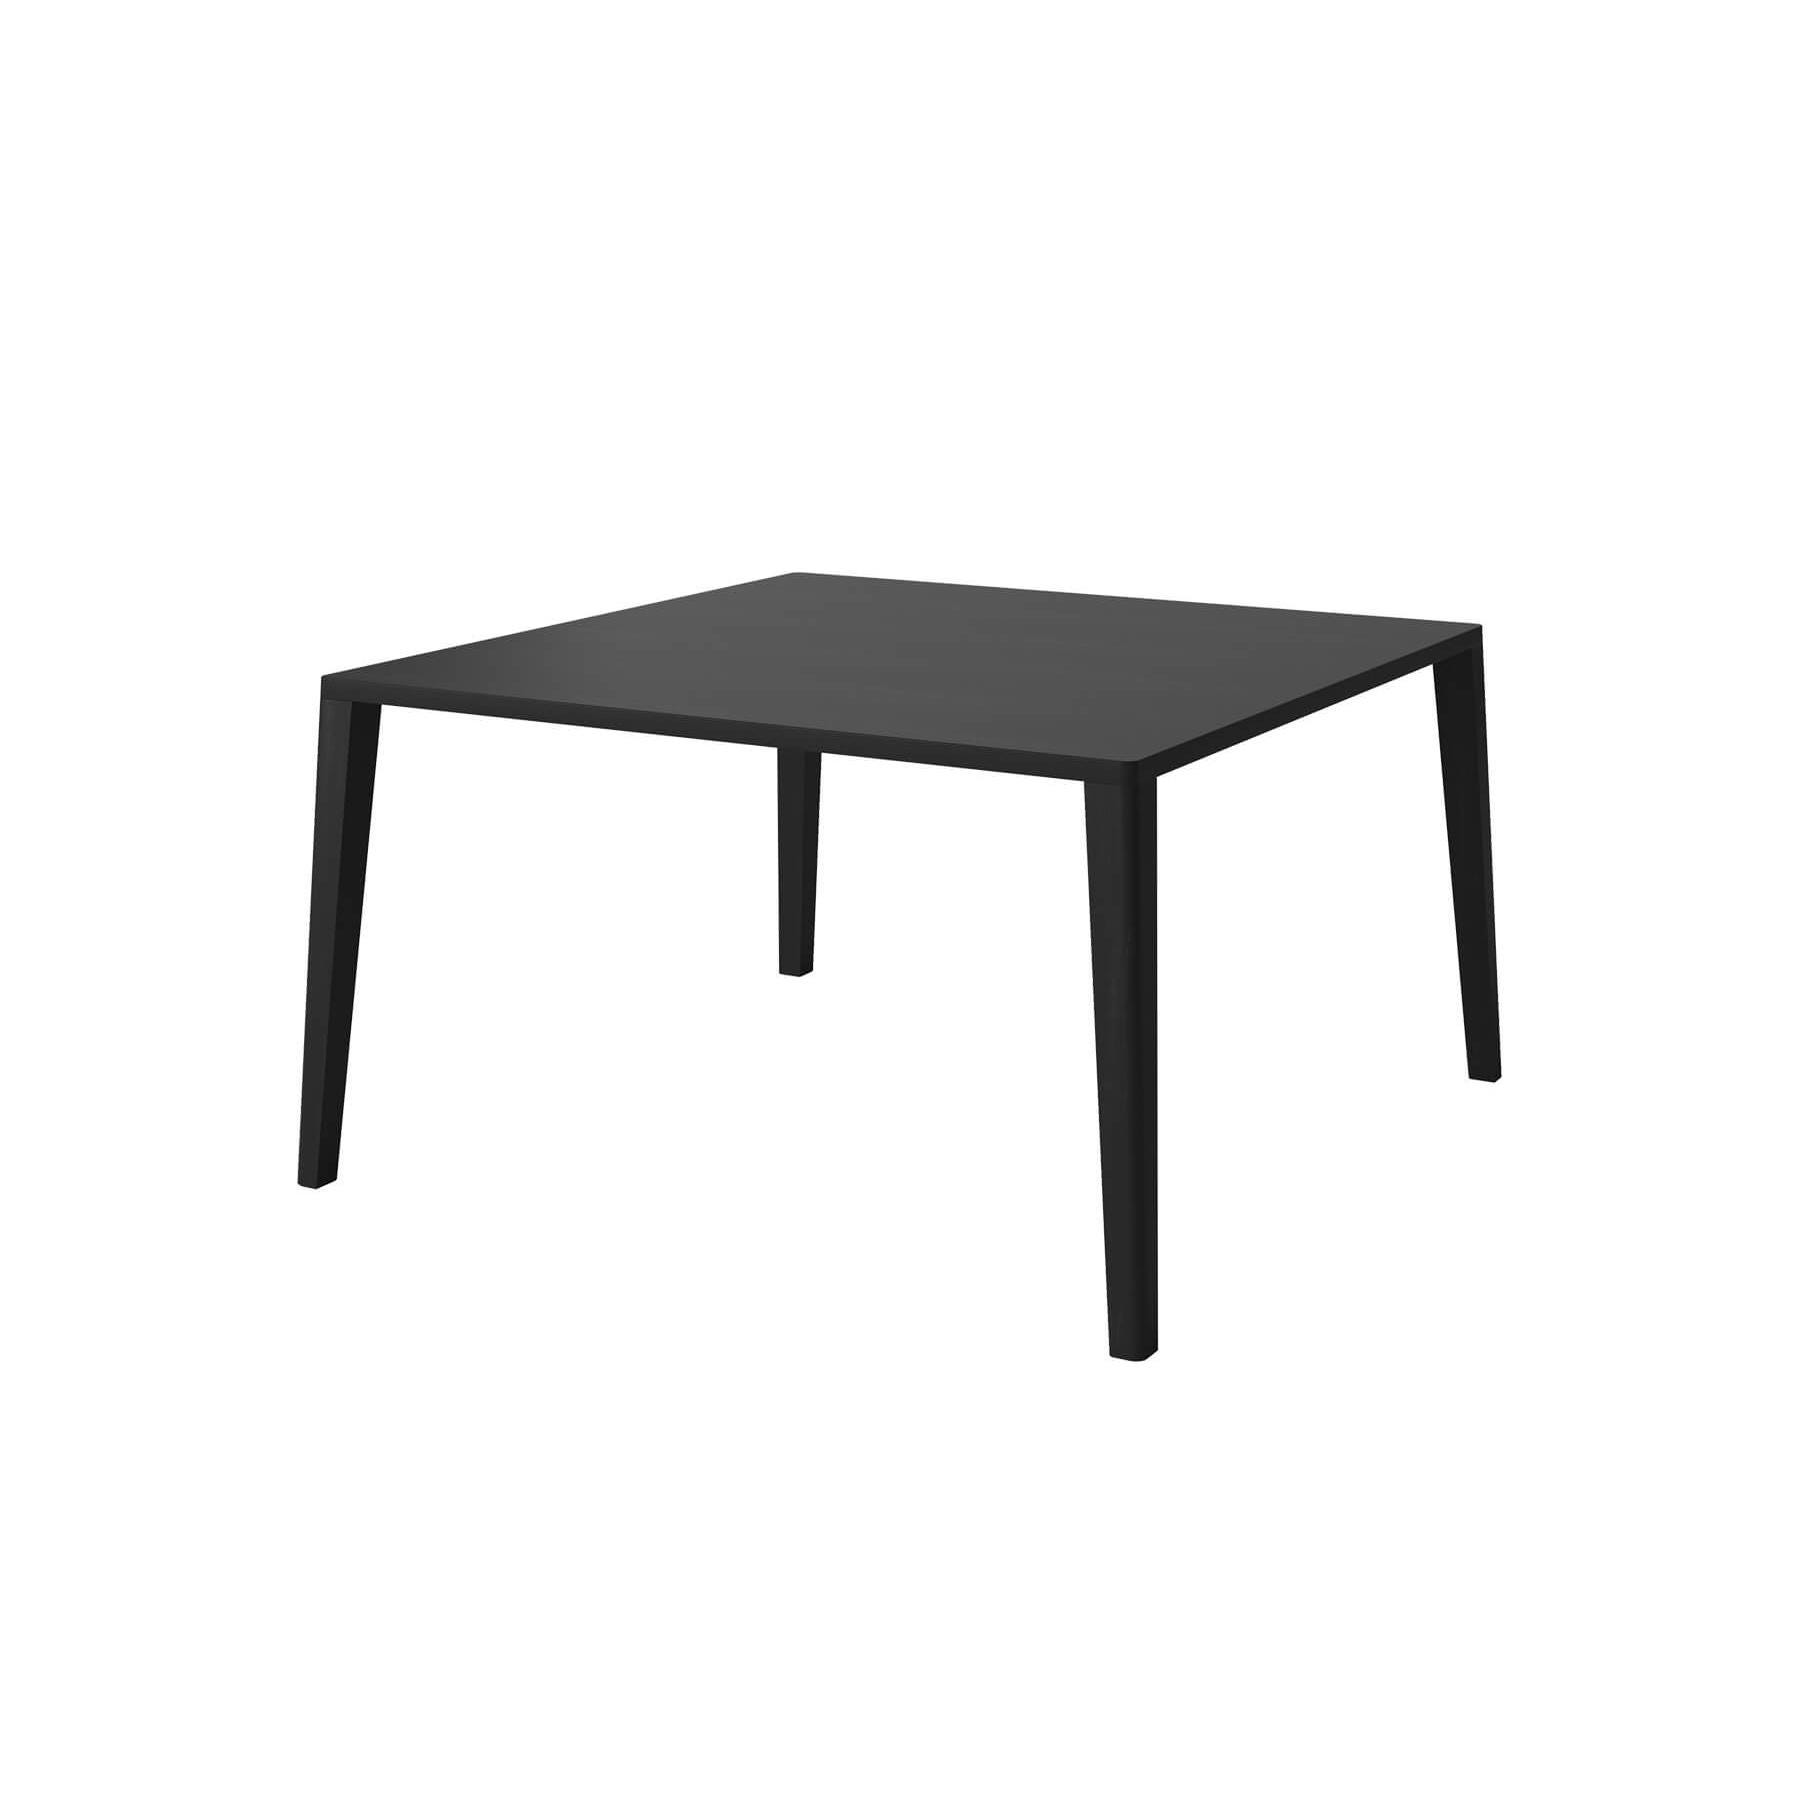 Bolia Graceful Dining Table 130 X 130cm Black Stained Legs Without Extension Leaves Designer Furniture From Holloways Of Ludlow